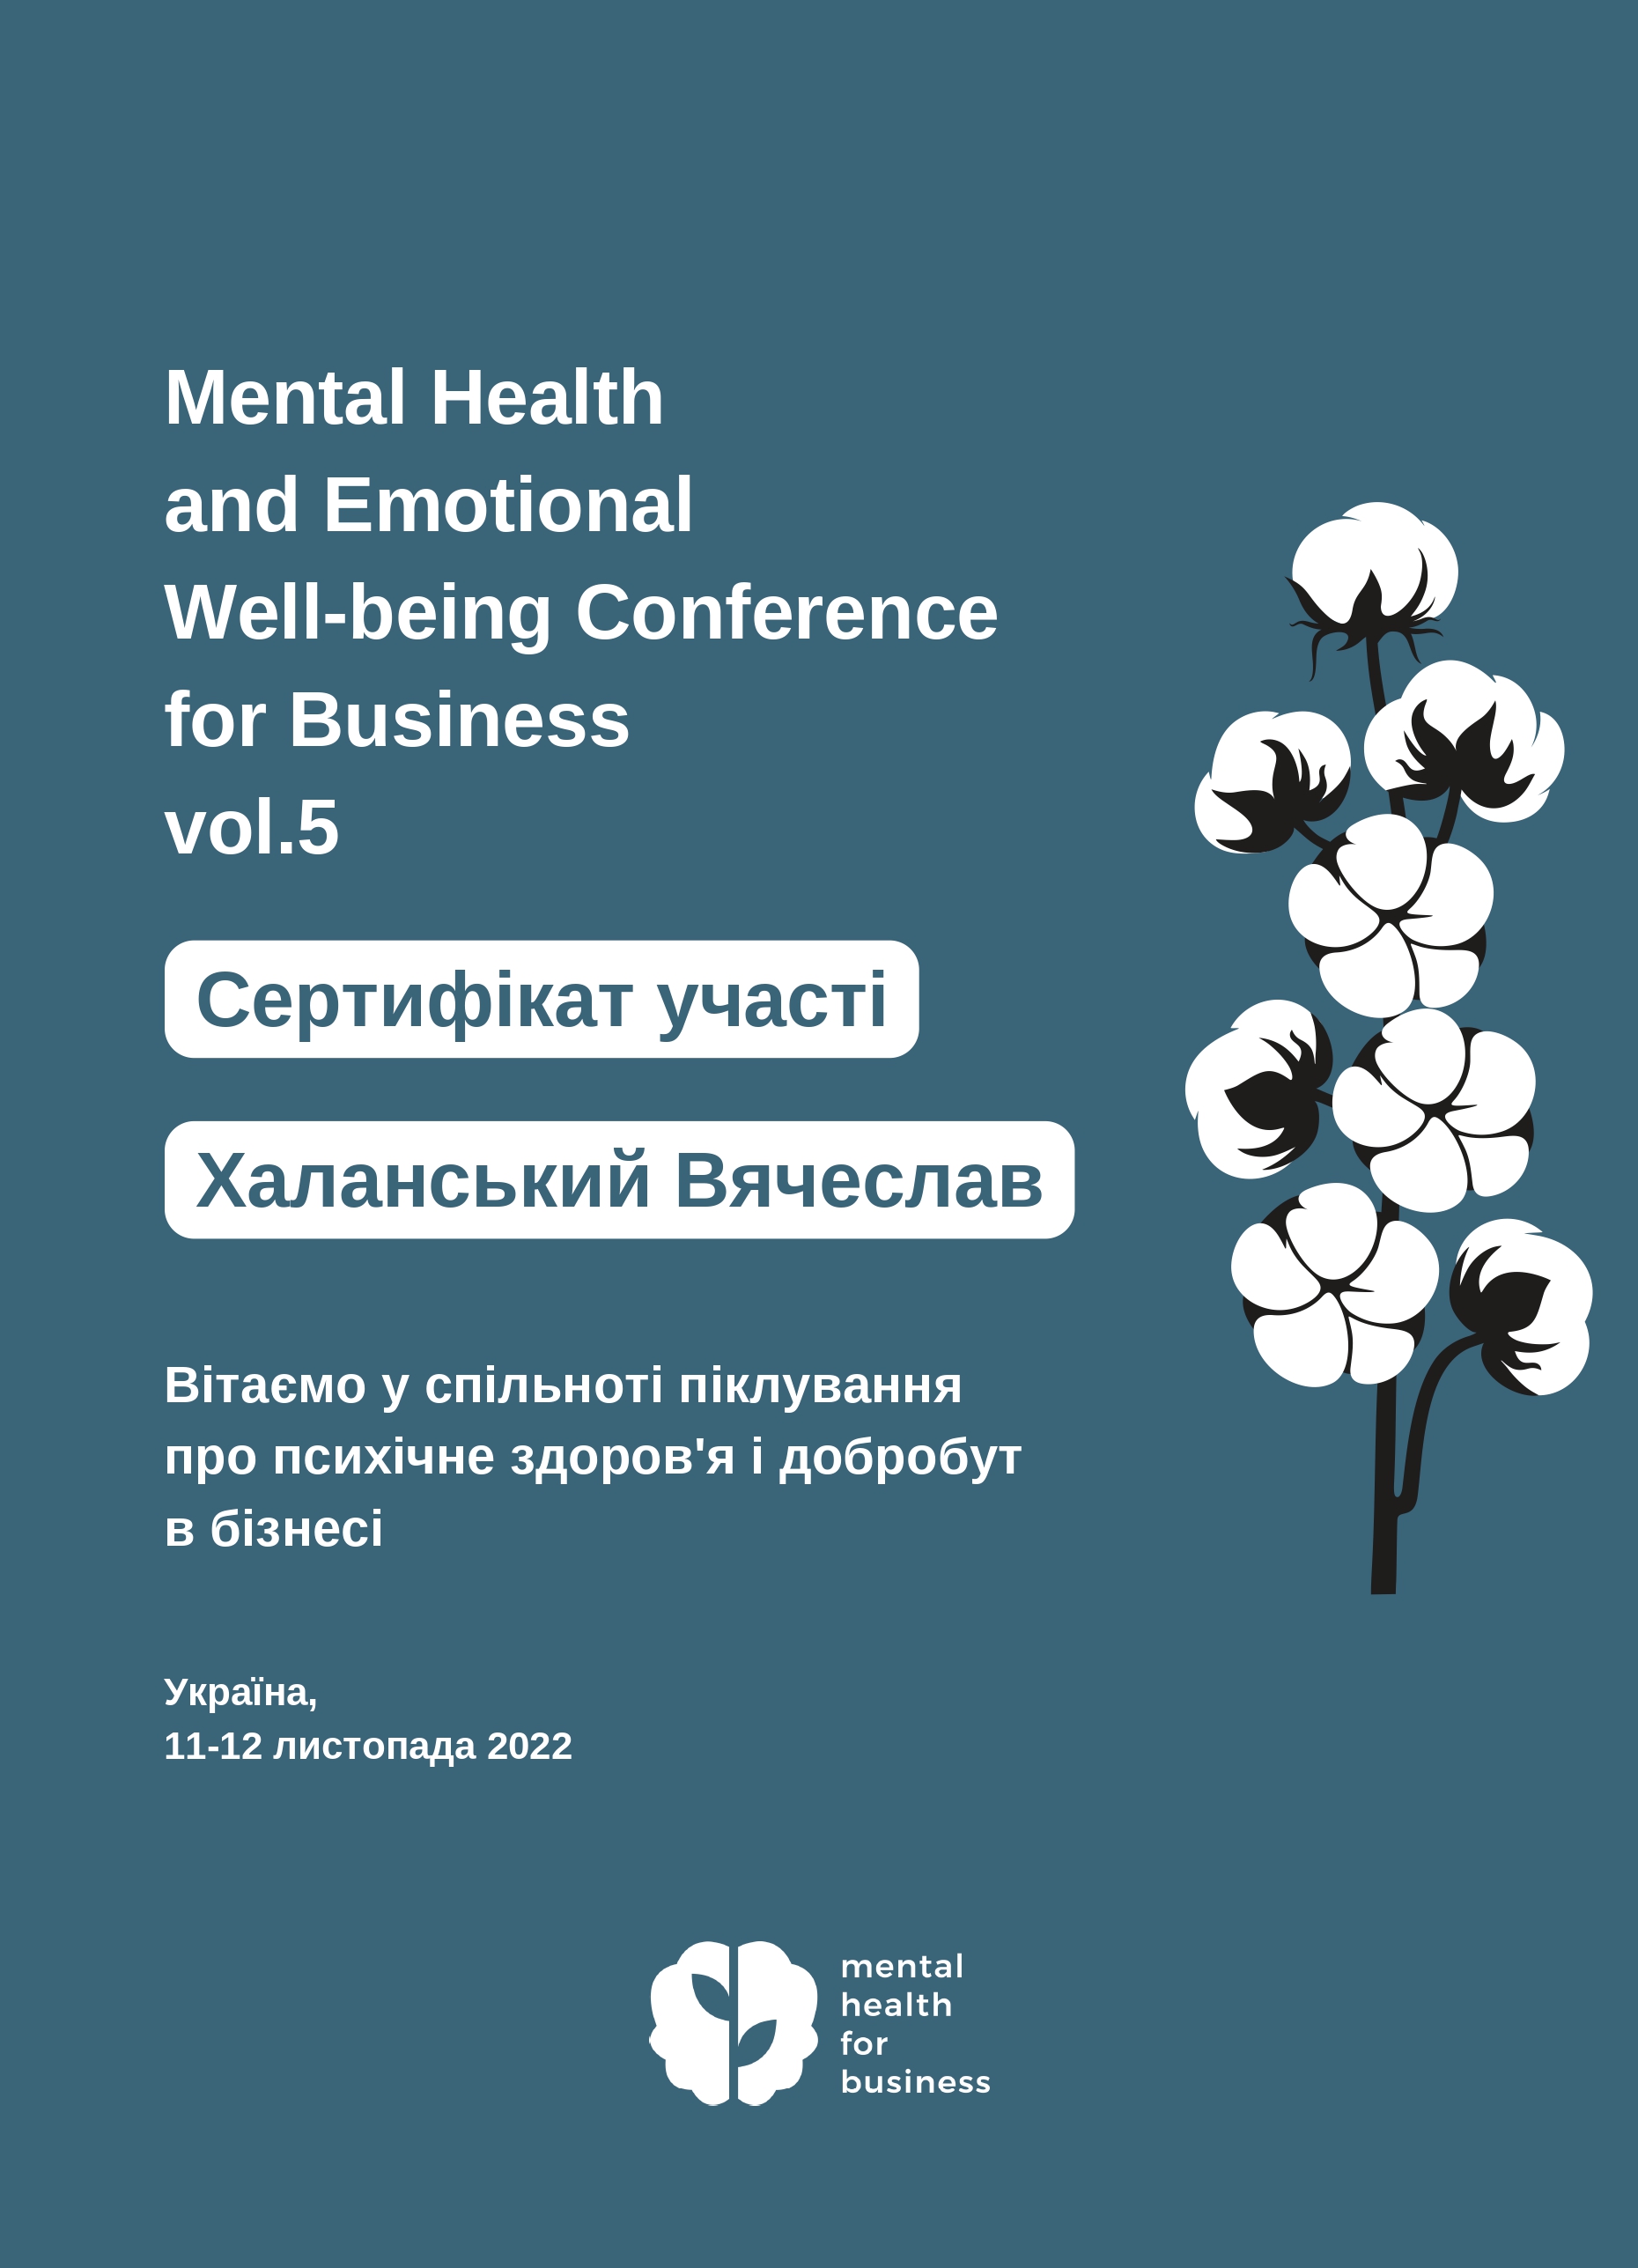 Mental-Health-and-Emotional-Well-Being-Conference-For-Business-2022